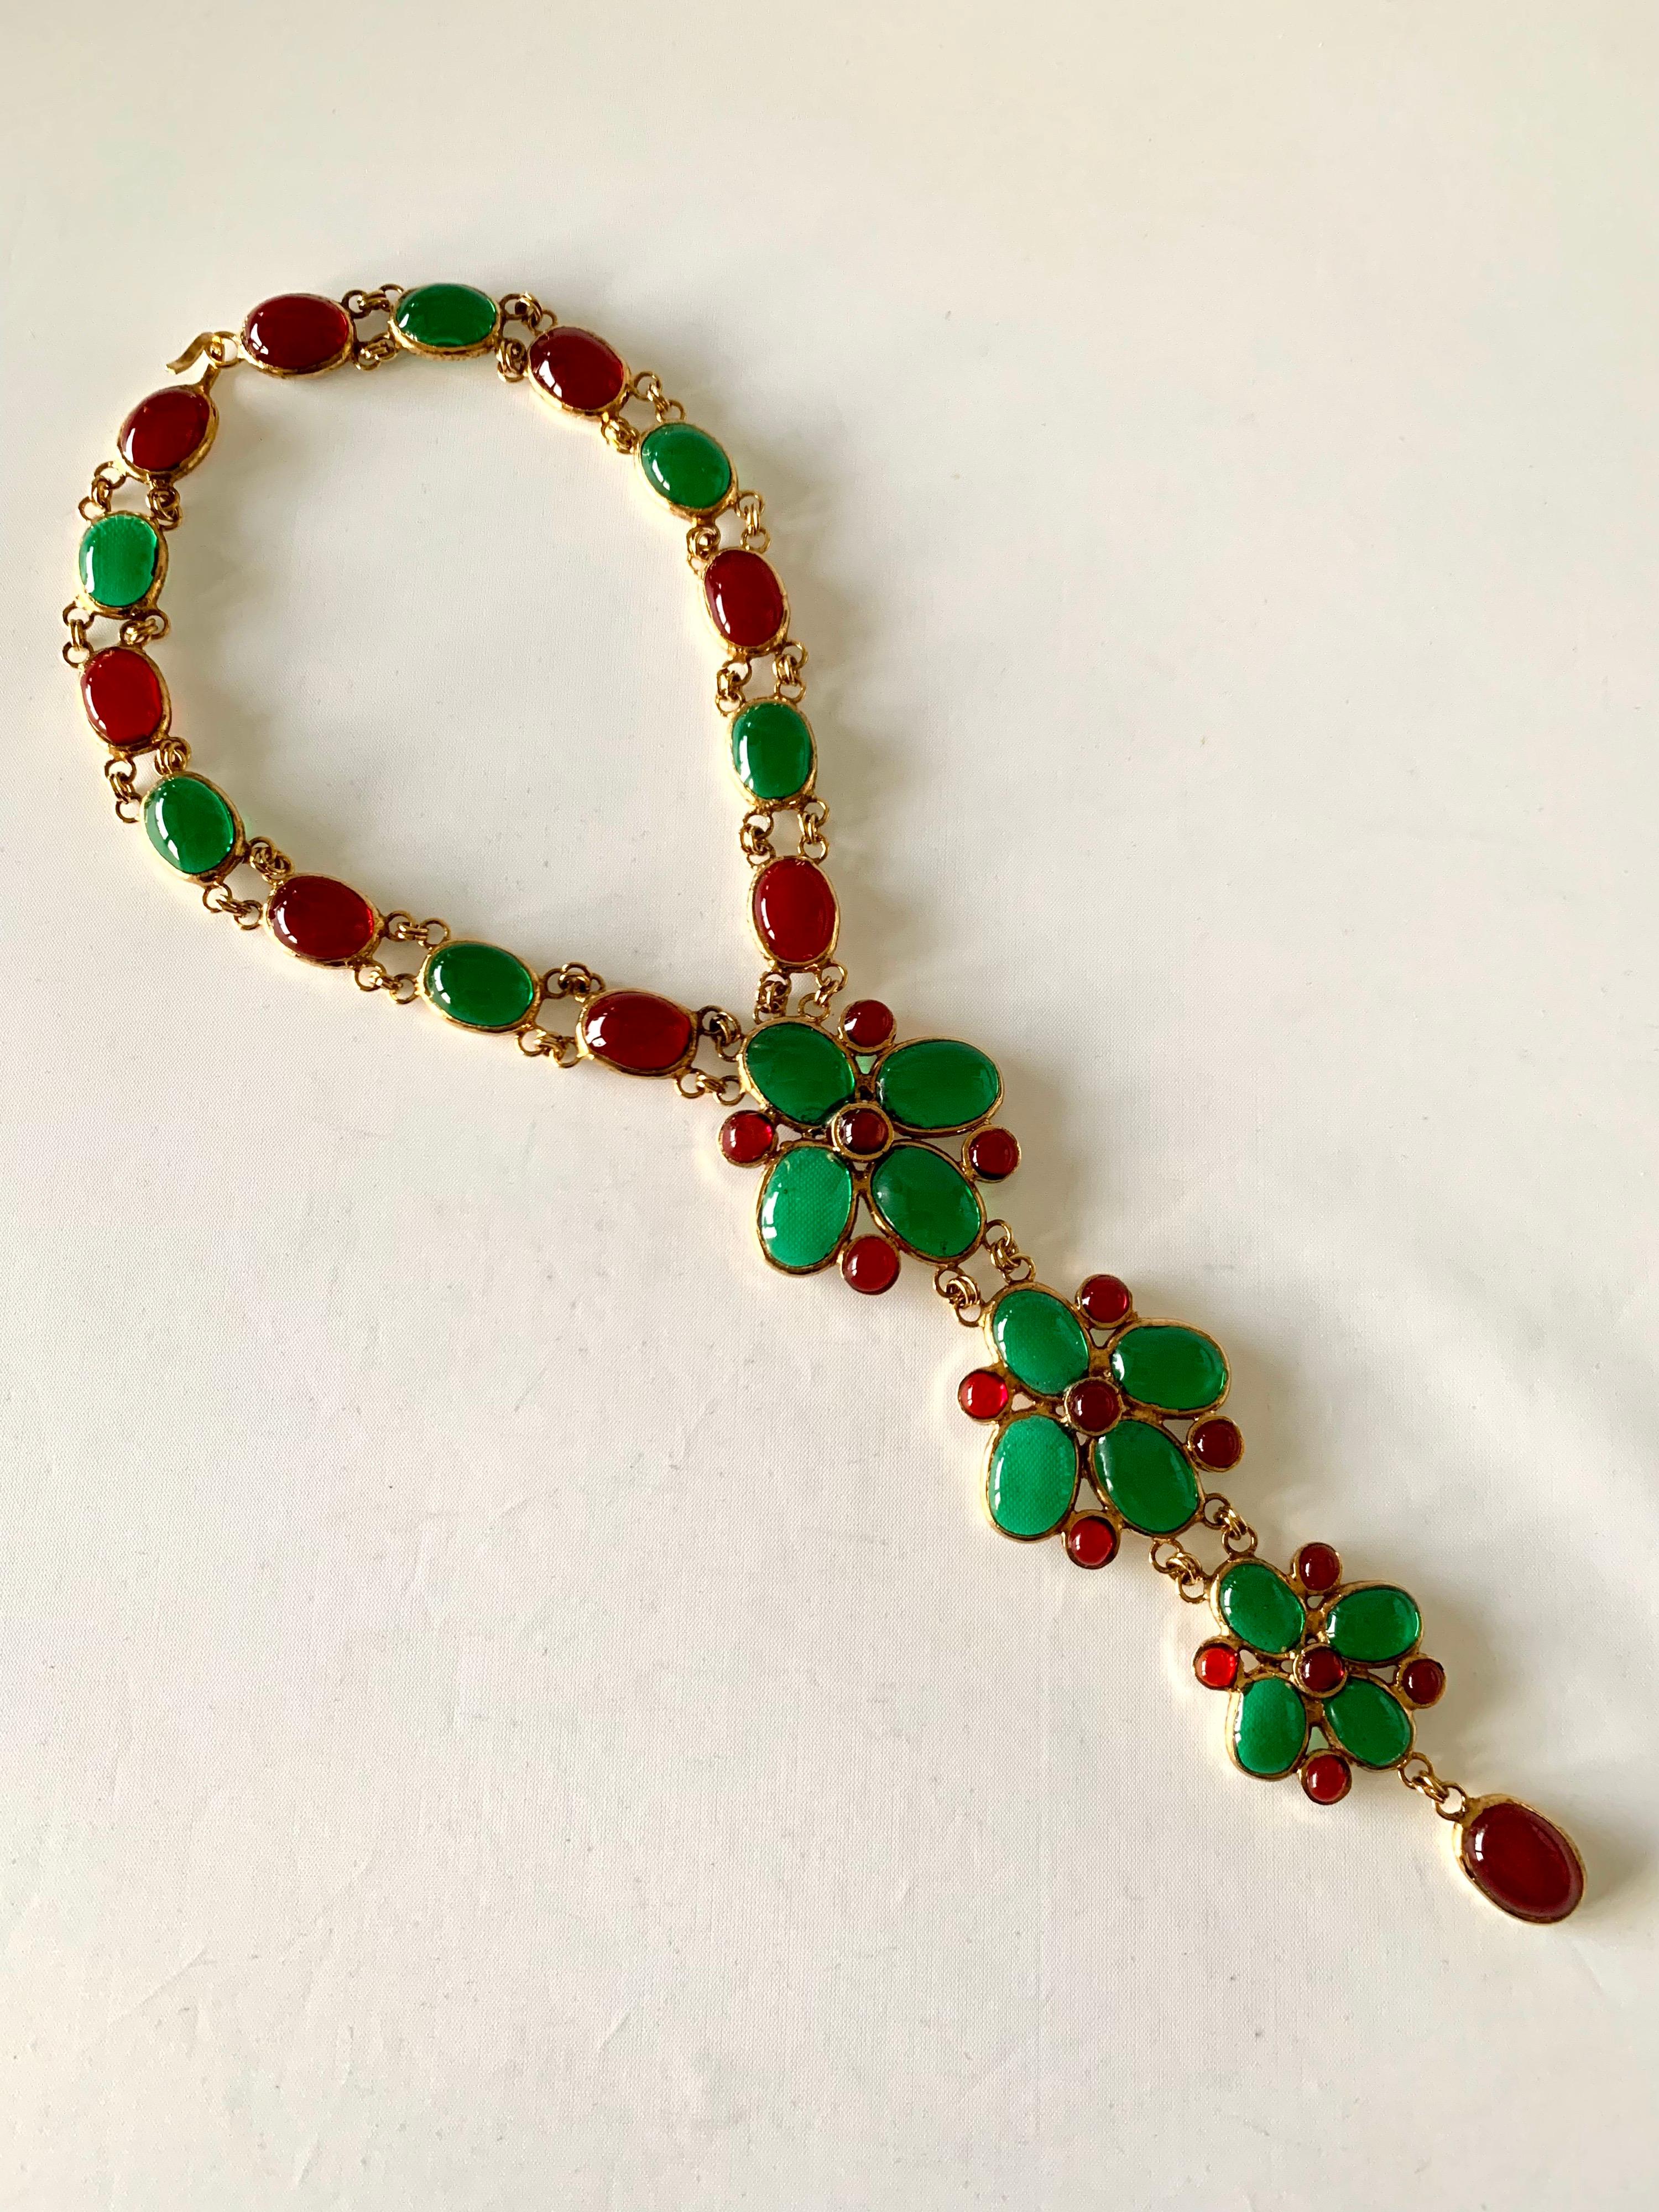 Byzantine Vintage Coco Chanel Gilt, Green and Red Statement Necklace